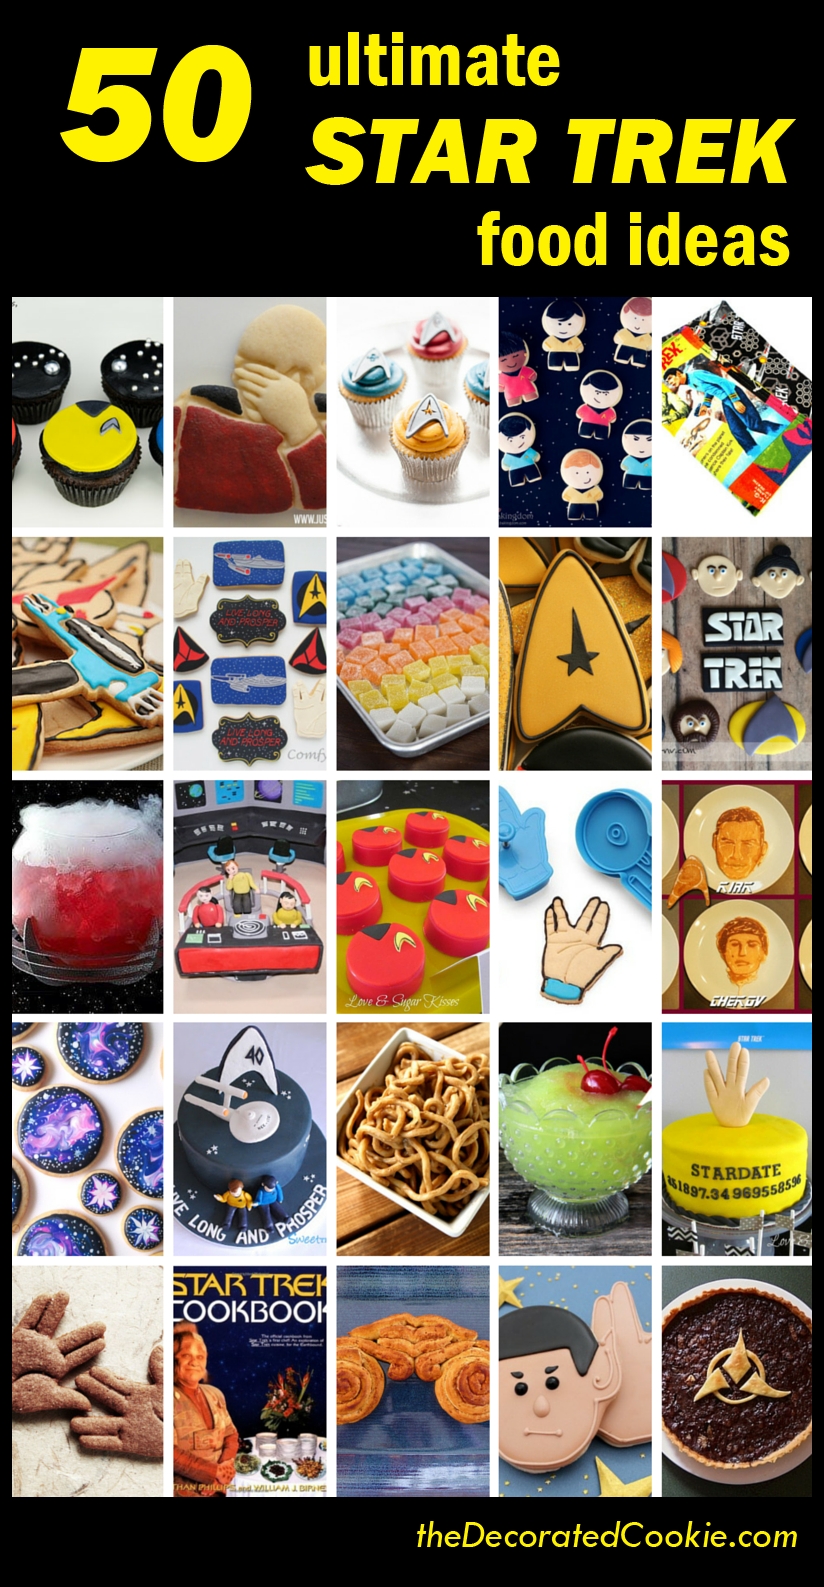 10 Attractive Food Ideas For Party Of 50 a roundup of 50 of the best star trek food ideas from around the web 2022